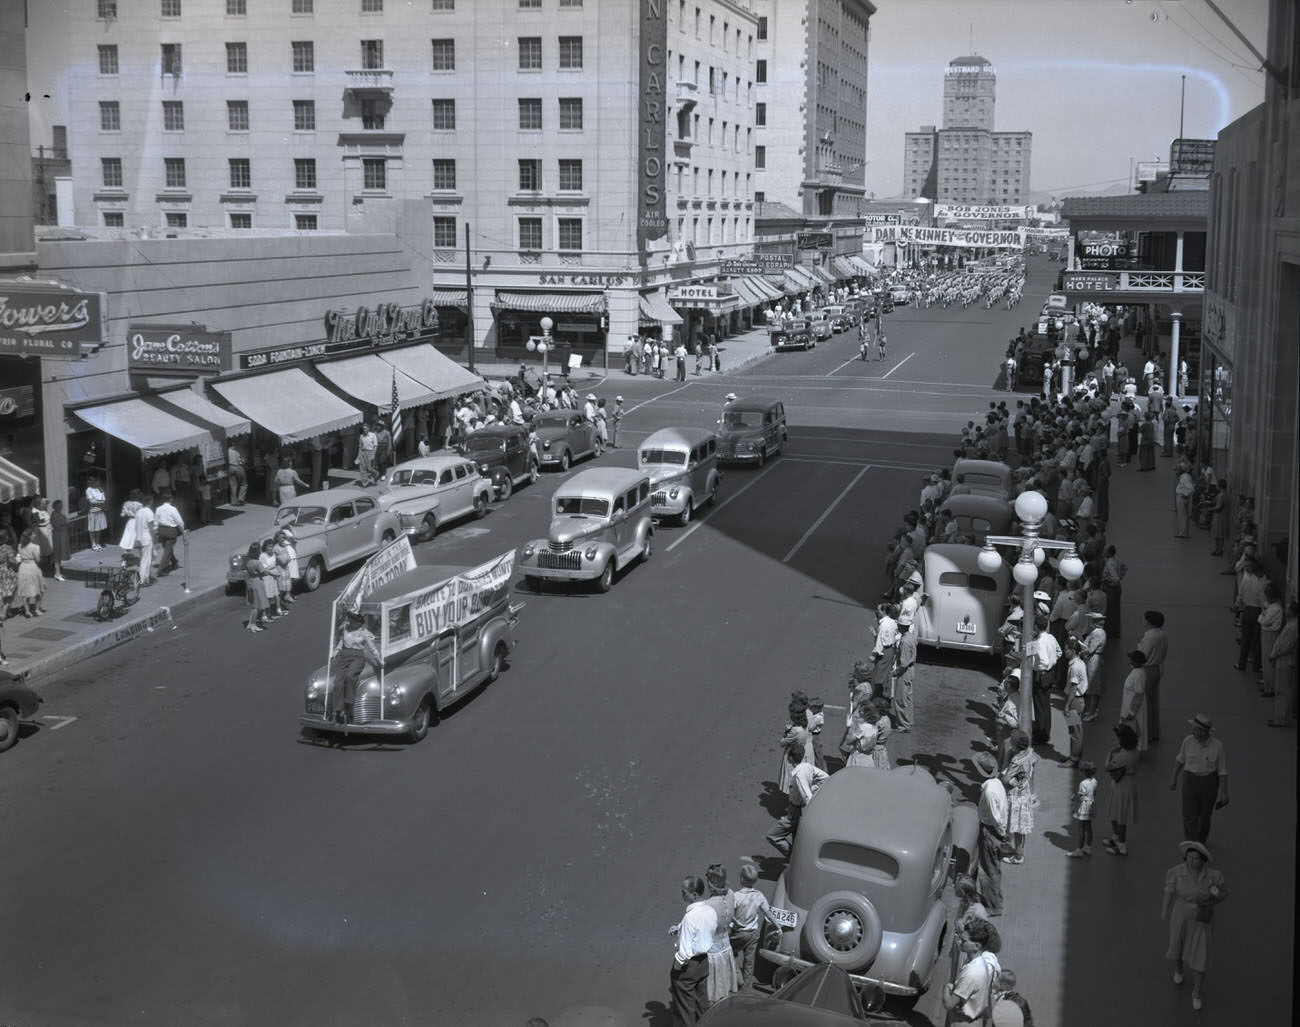 U.S. Bond Parade, 1942. The parade is moving south on Central Ave. at the intersection of Central Ave. and W. Monroe St.